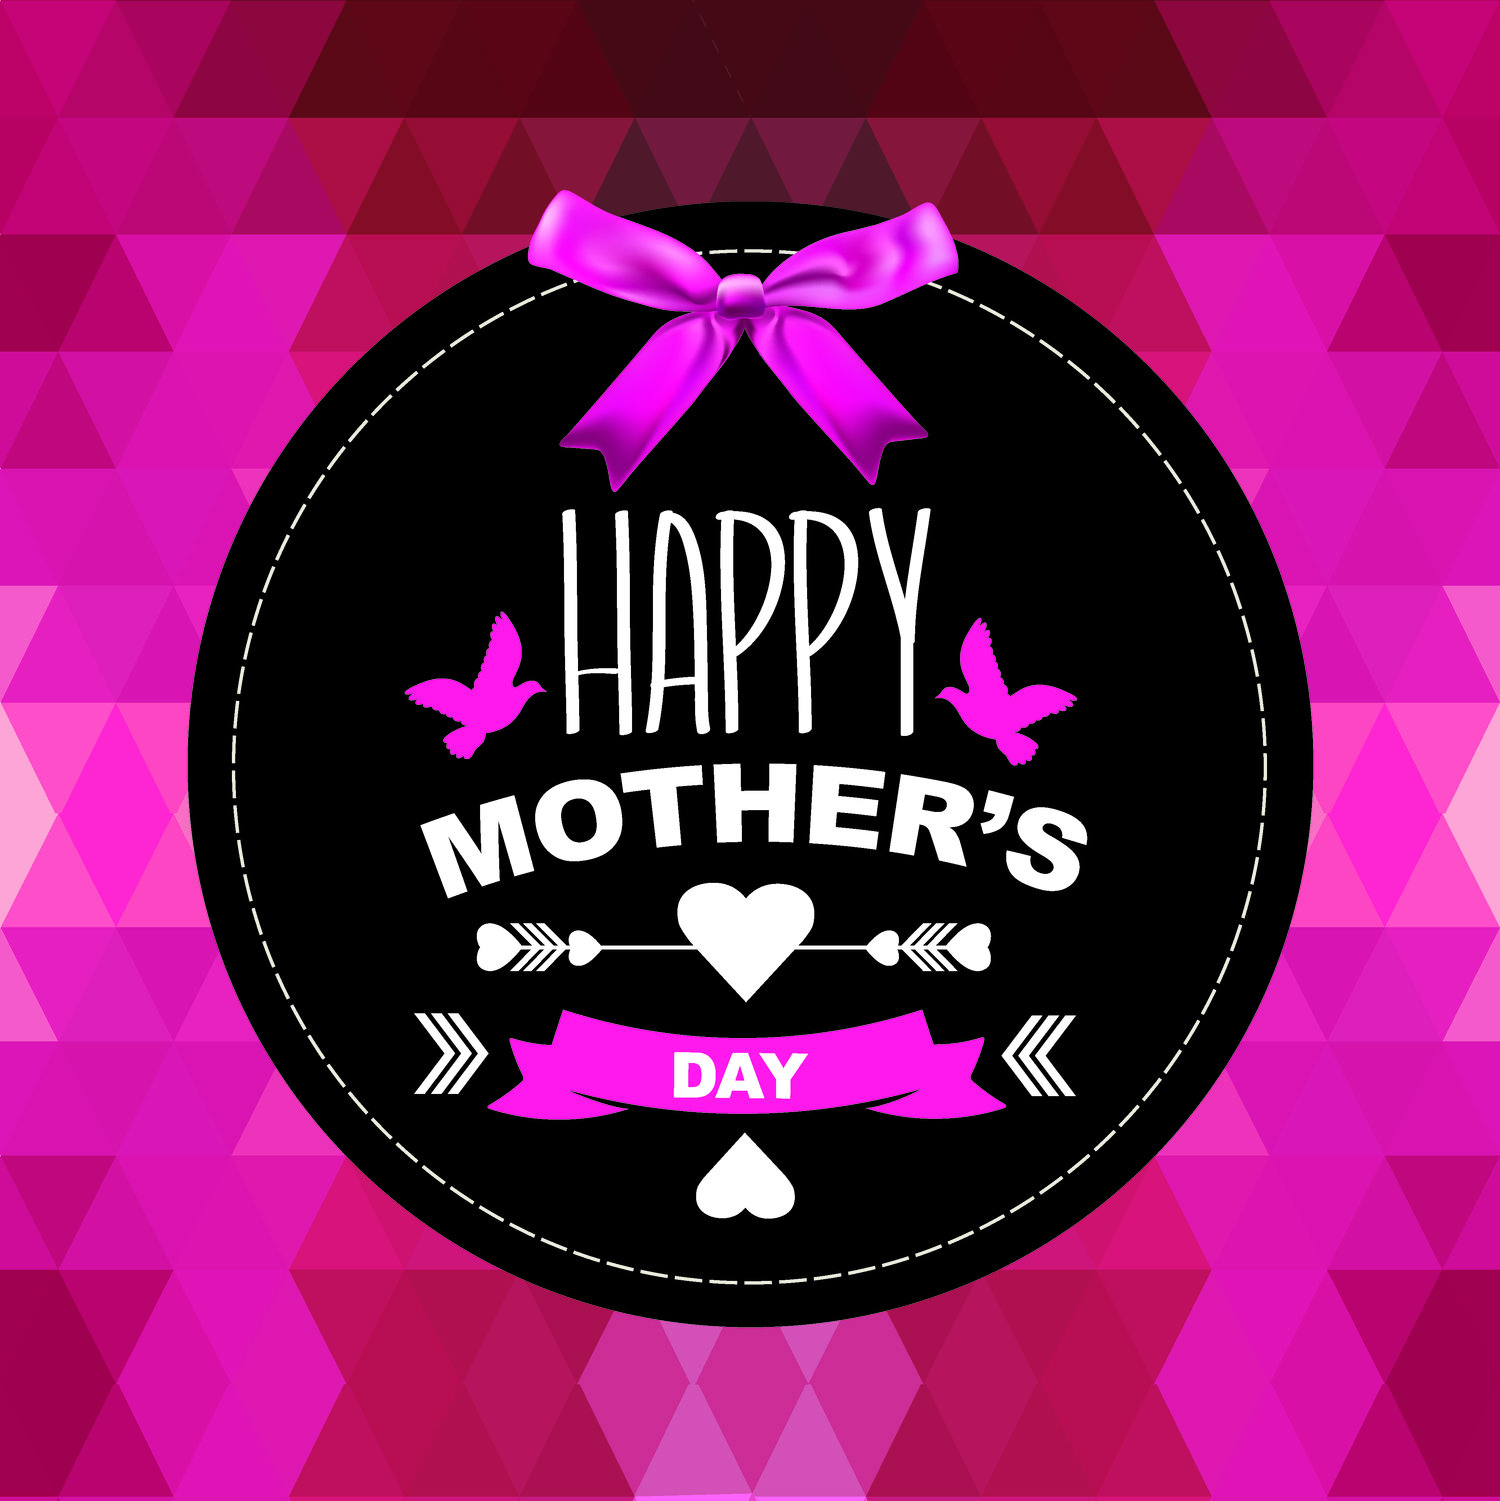 Happy Mother’s Day Adorable Greeting Card